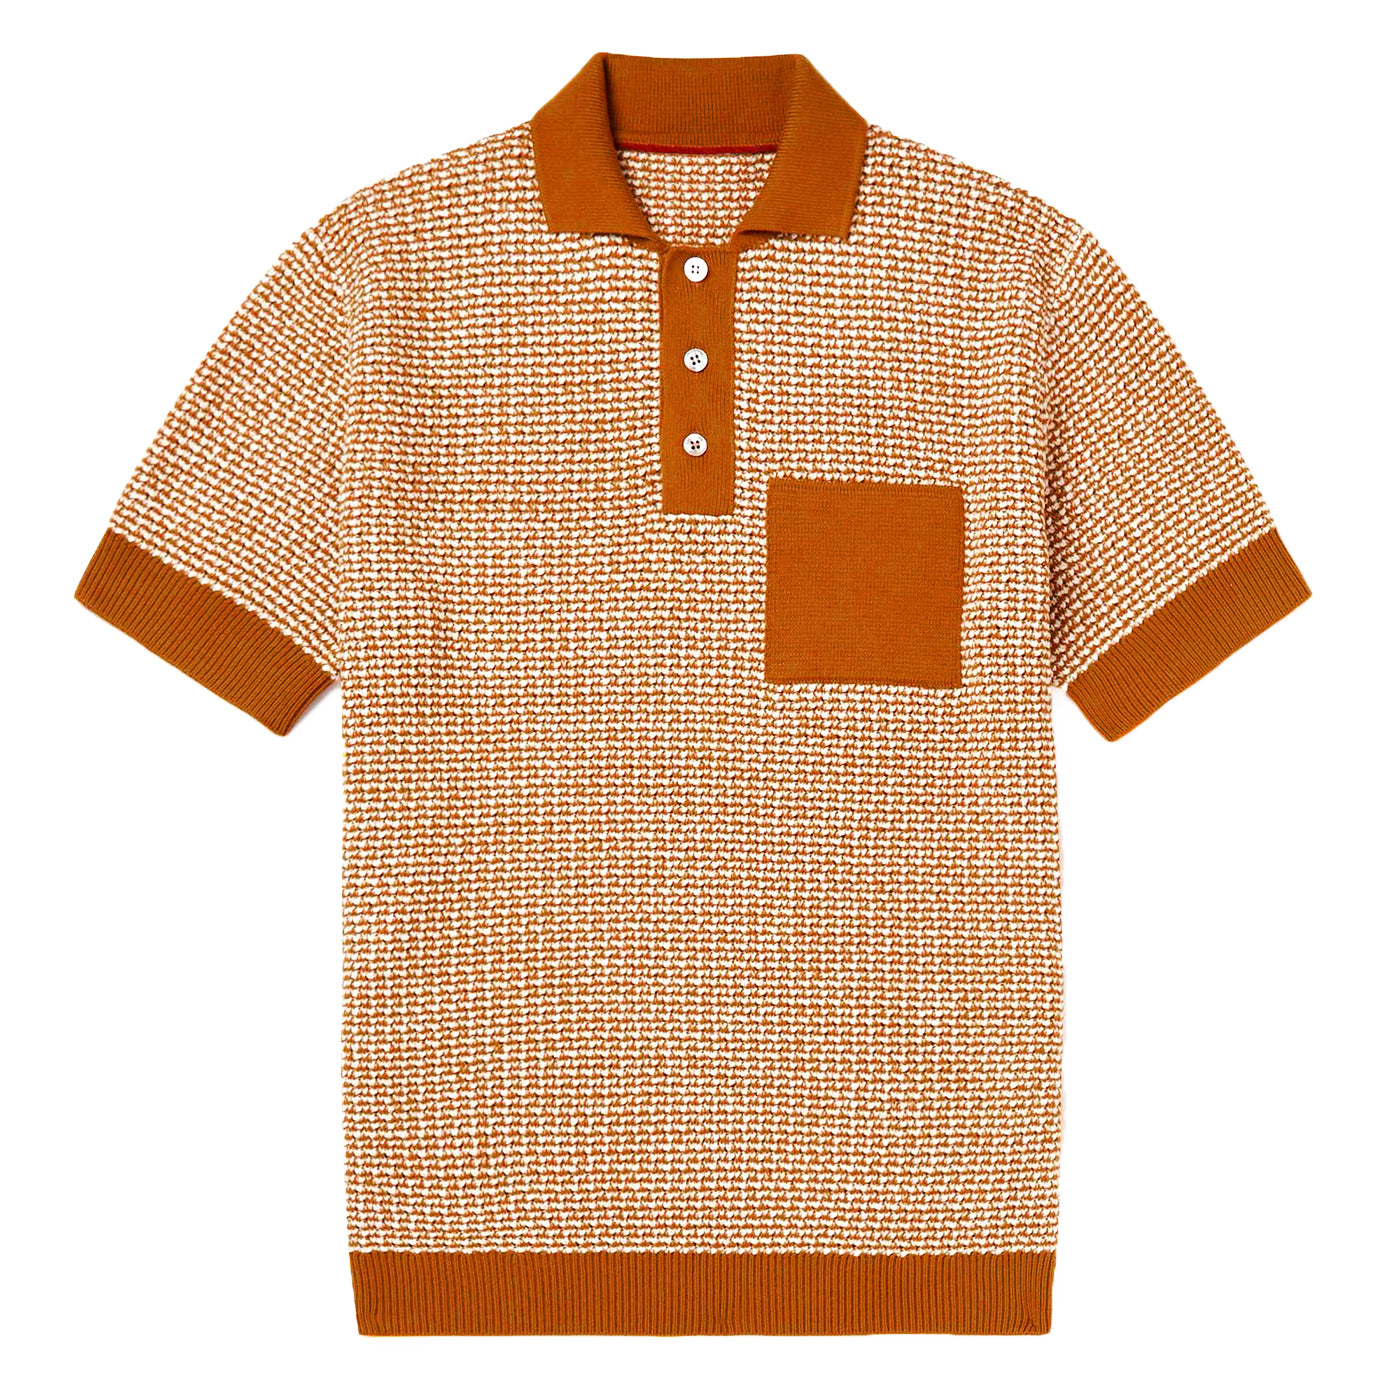 OXKNIT Men Vintage Clothing 1960s Mod Style Casual Orange Knitted with Pocket Retro Polo 